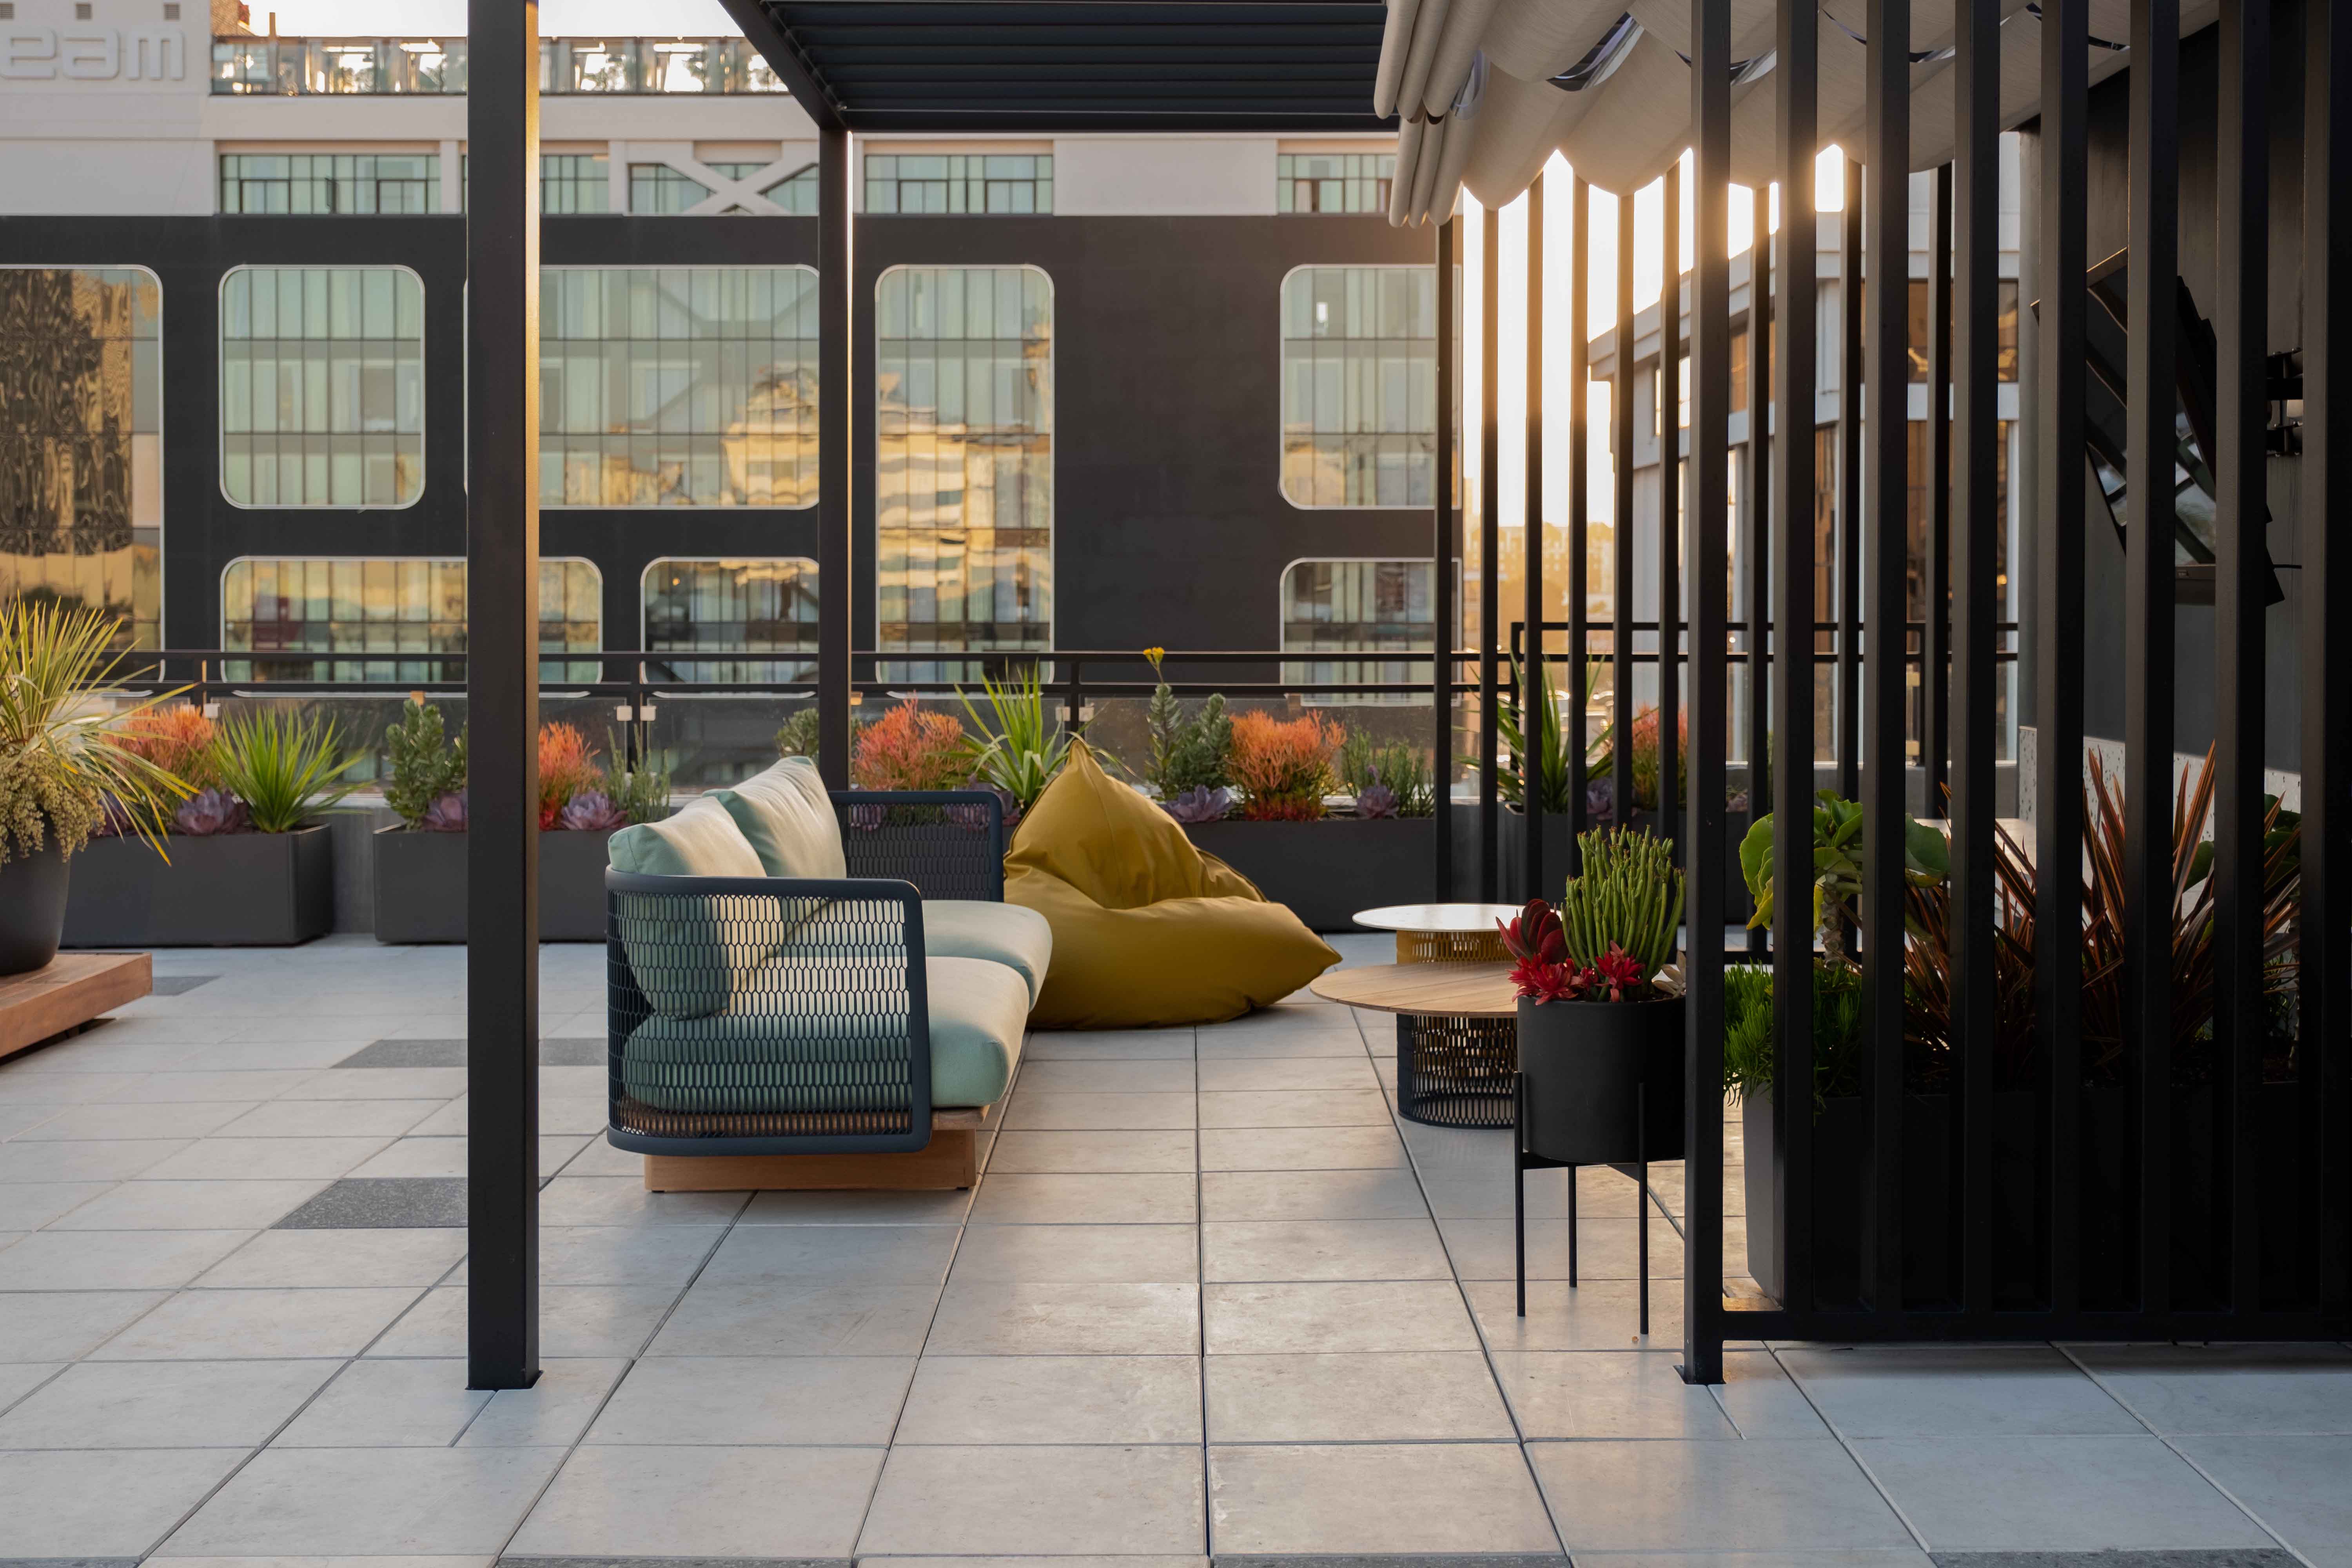 In 2003, an underutilized 42,000 sf warehouse in Hollywood was converted to 47 residential lofts. In 2017, when the building’s new owners opted to renovate, we were brought on board to reimagine the ground-floor lobby and fifth-floor rooftop. 